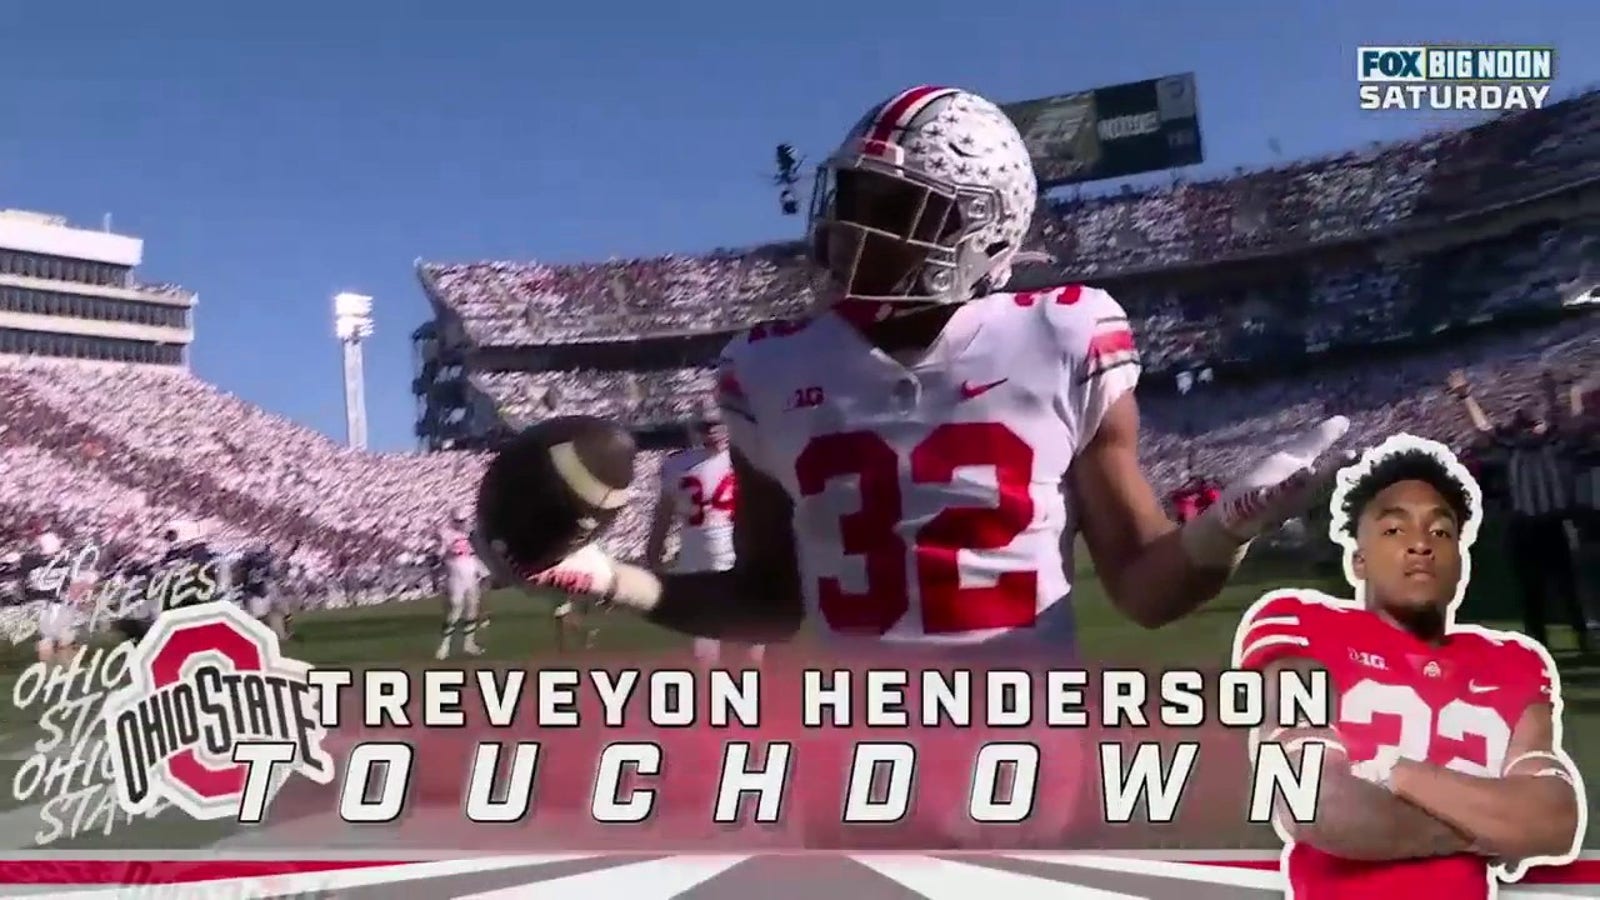 Ohio State takes a 36-24 lead after TreVeyon Henderson's seven-yard rushing TD